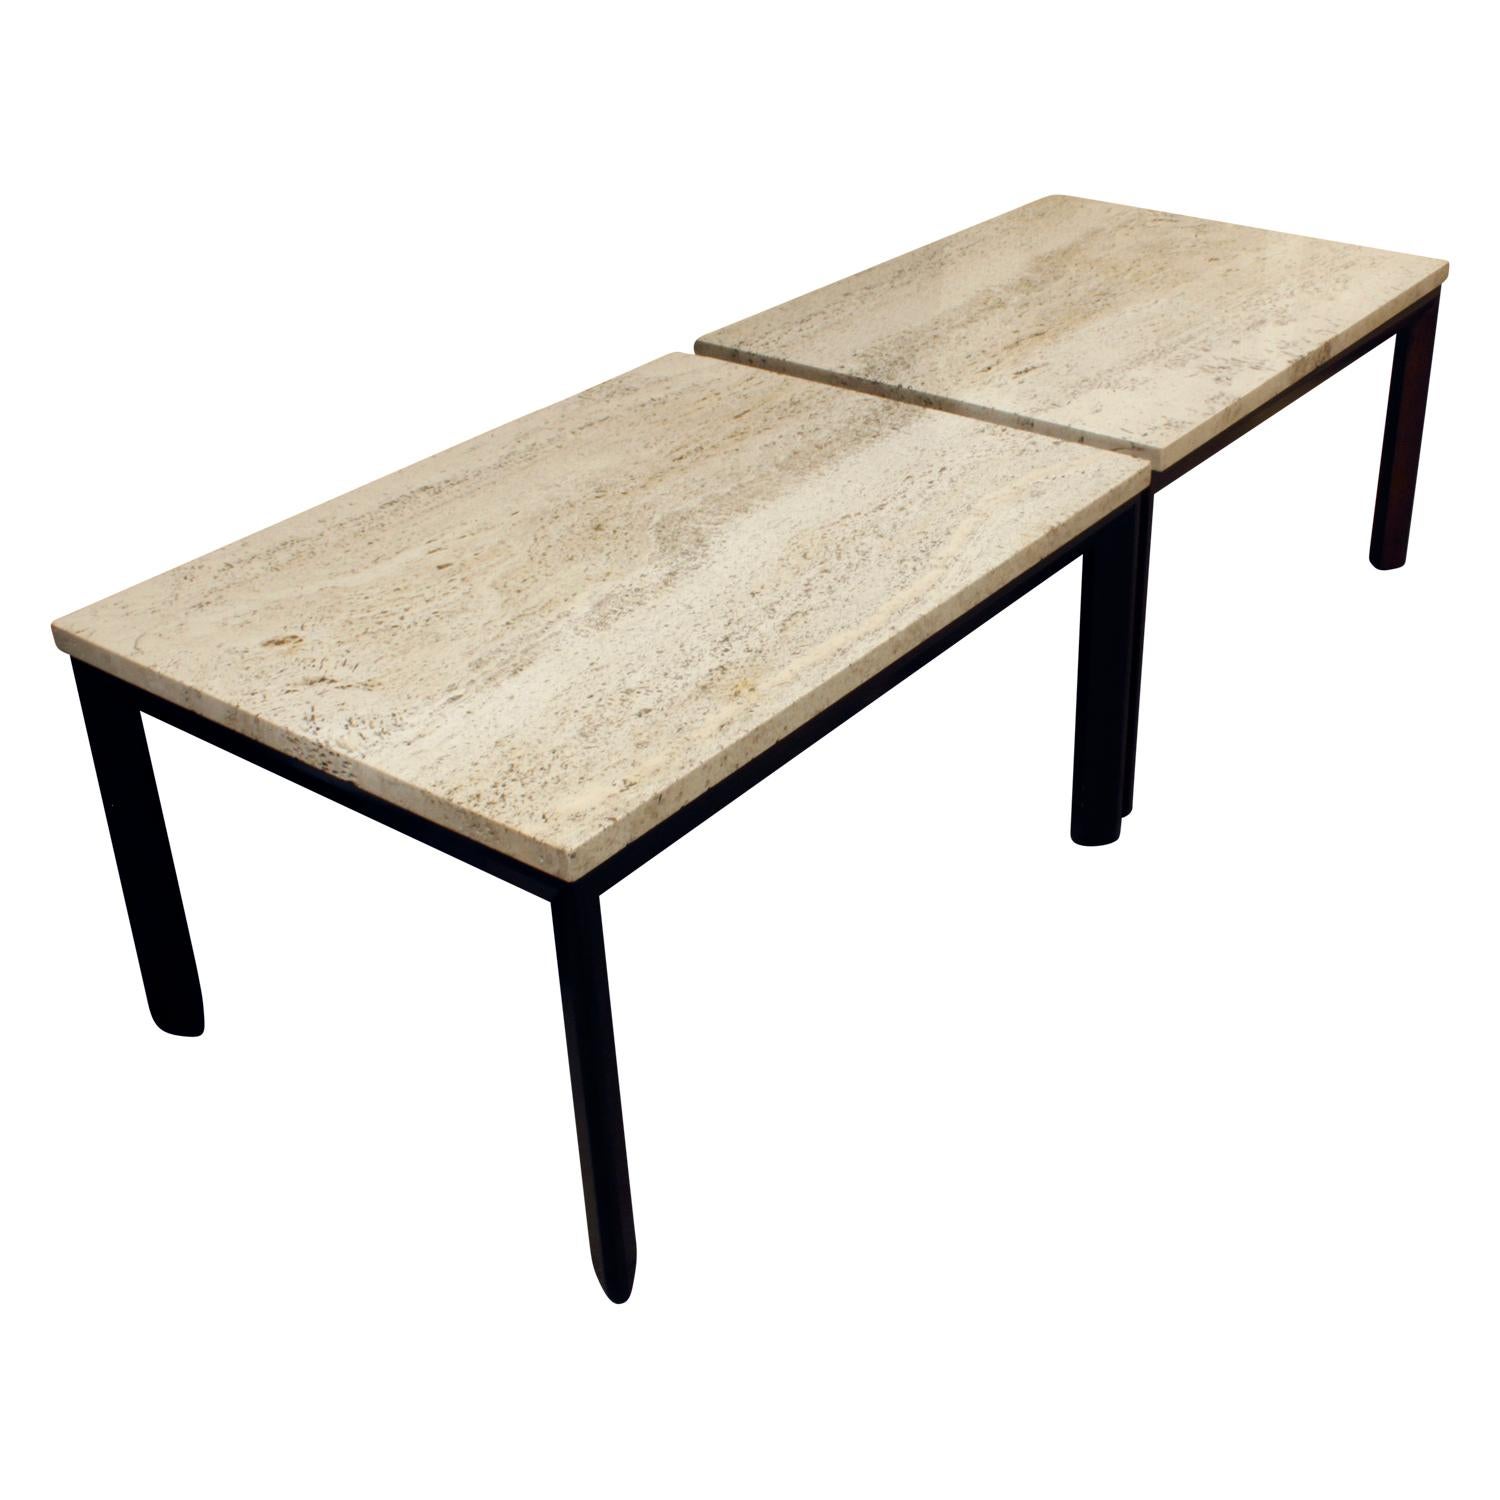 Mid-Century Modern Pair of Angular Leg Coffee Tables with Travertine Tops, 1950s For Sale